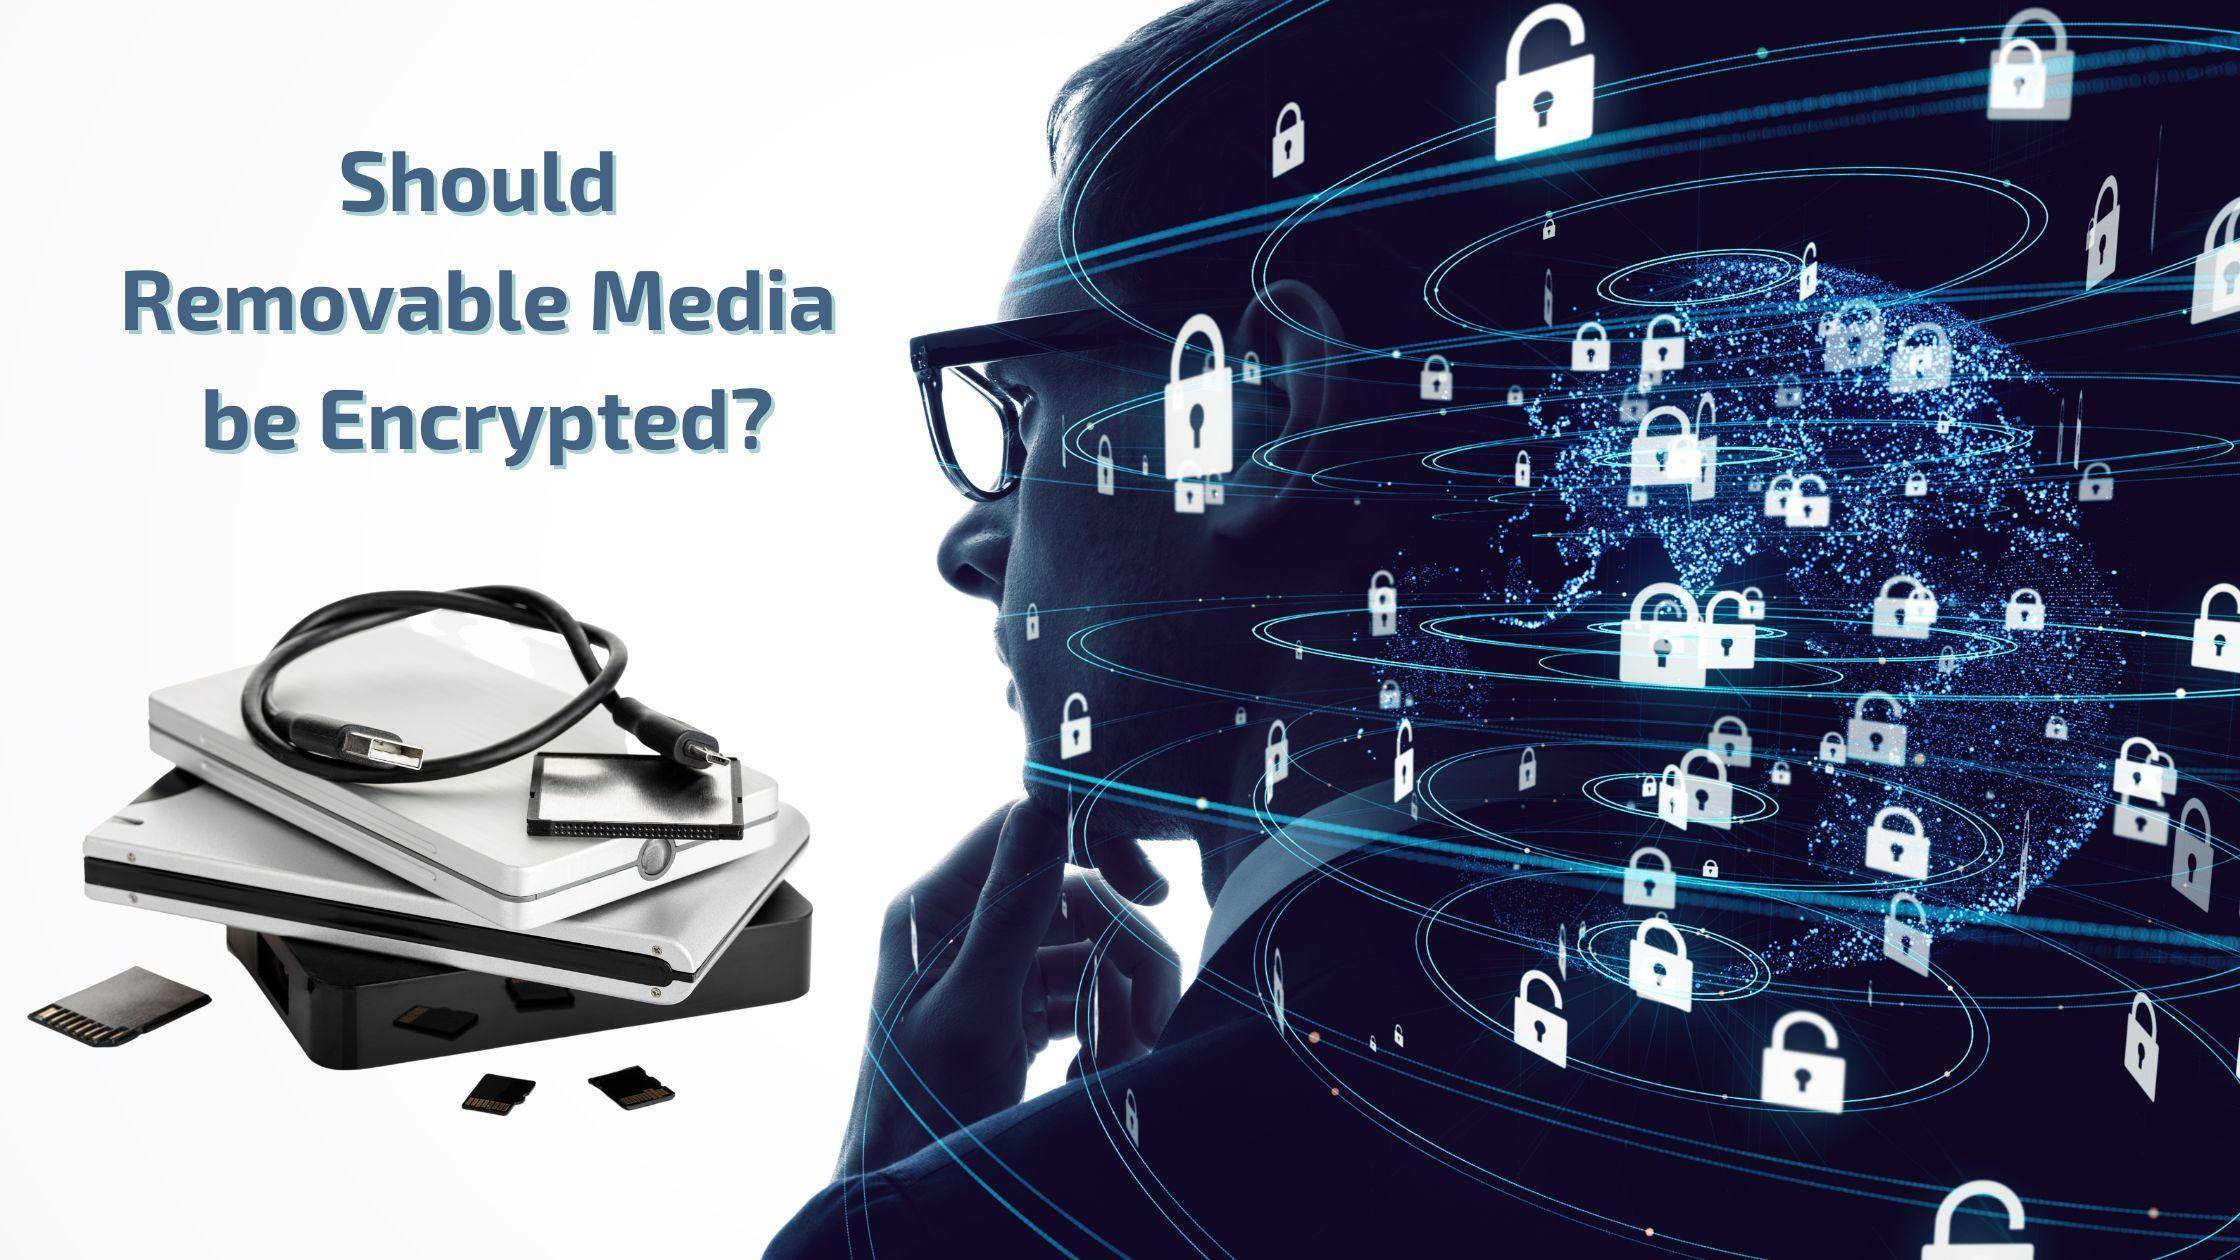 Should removable media be encrypted